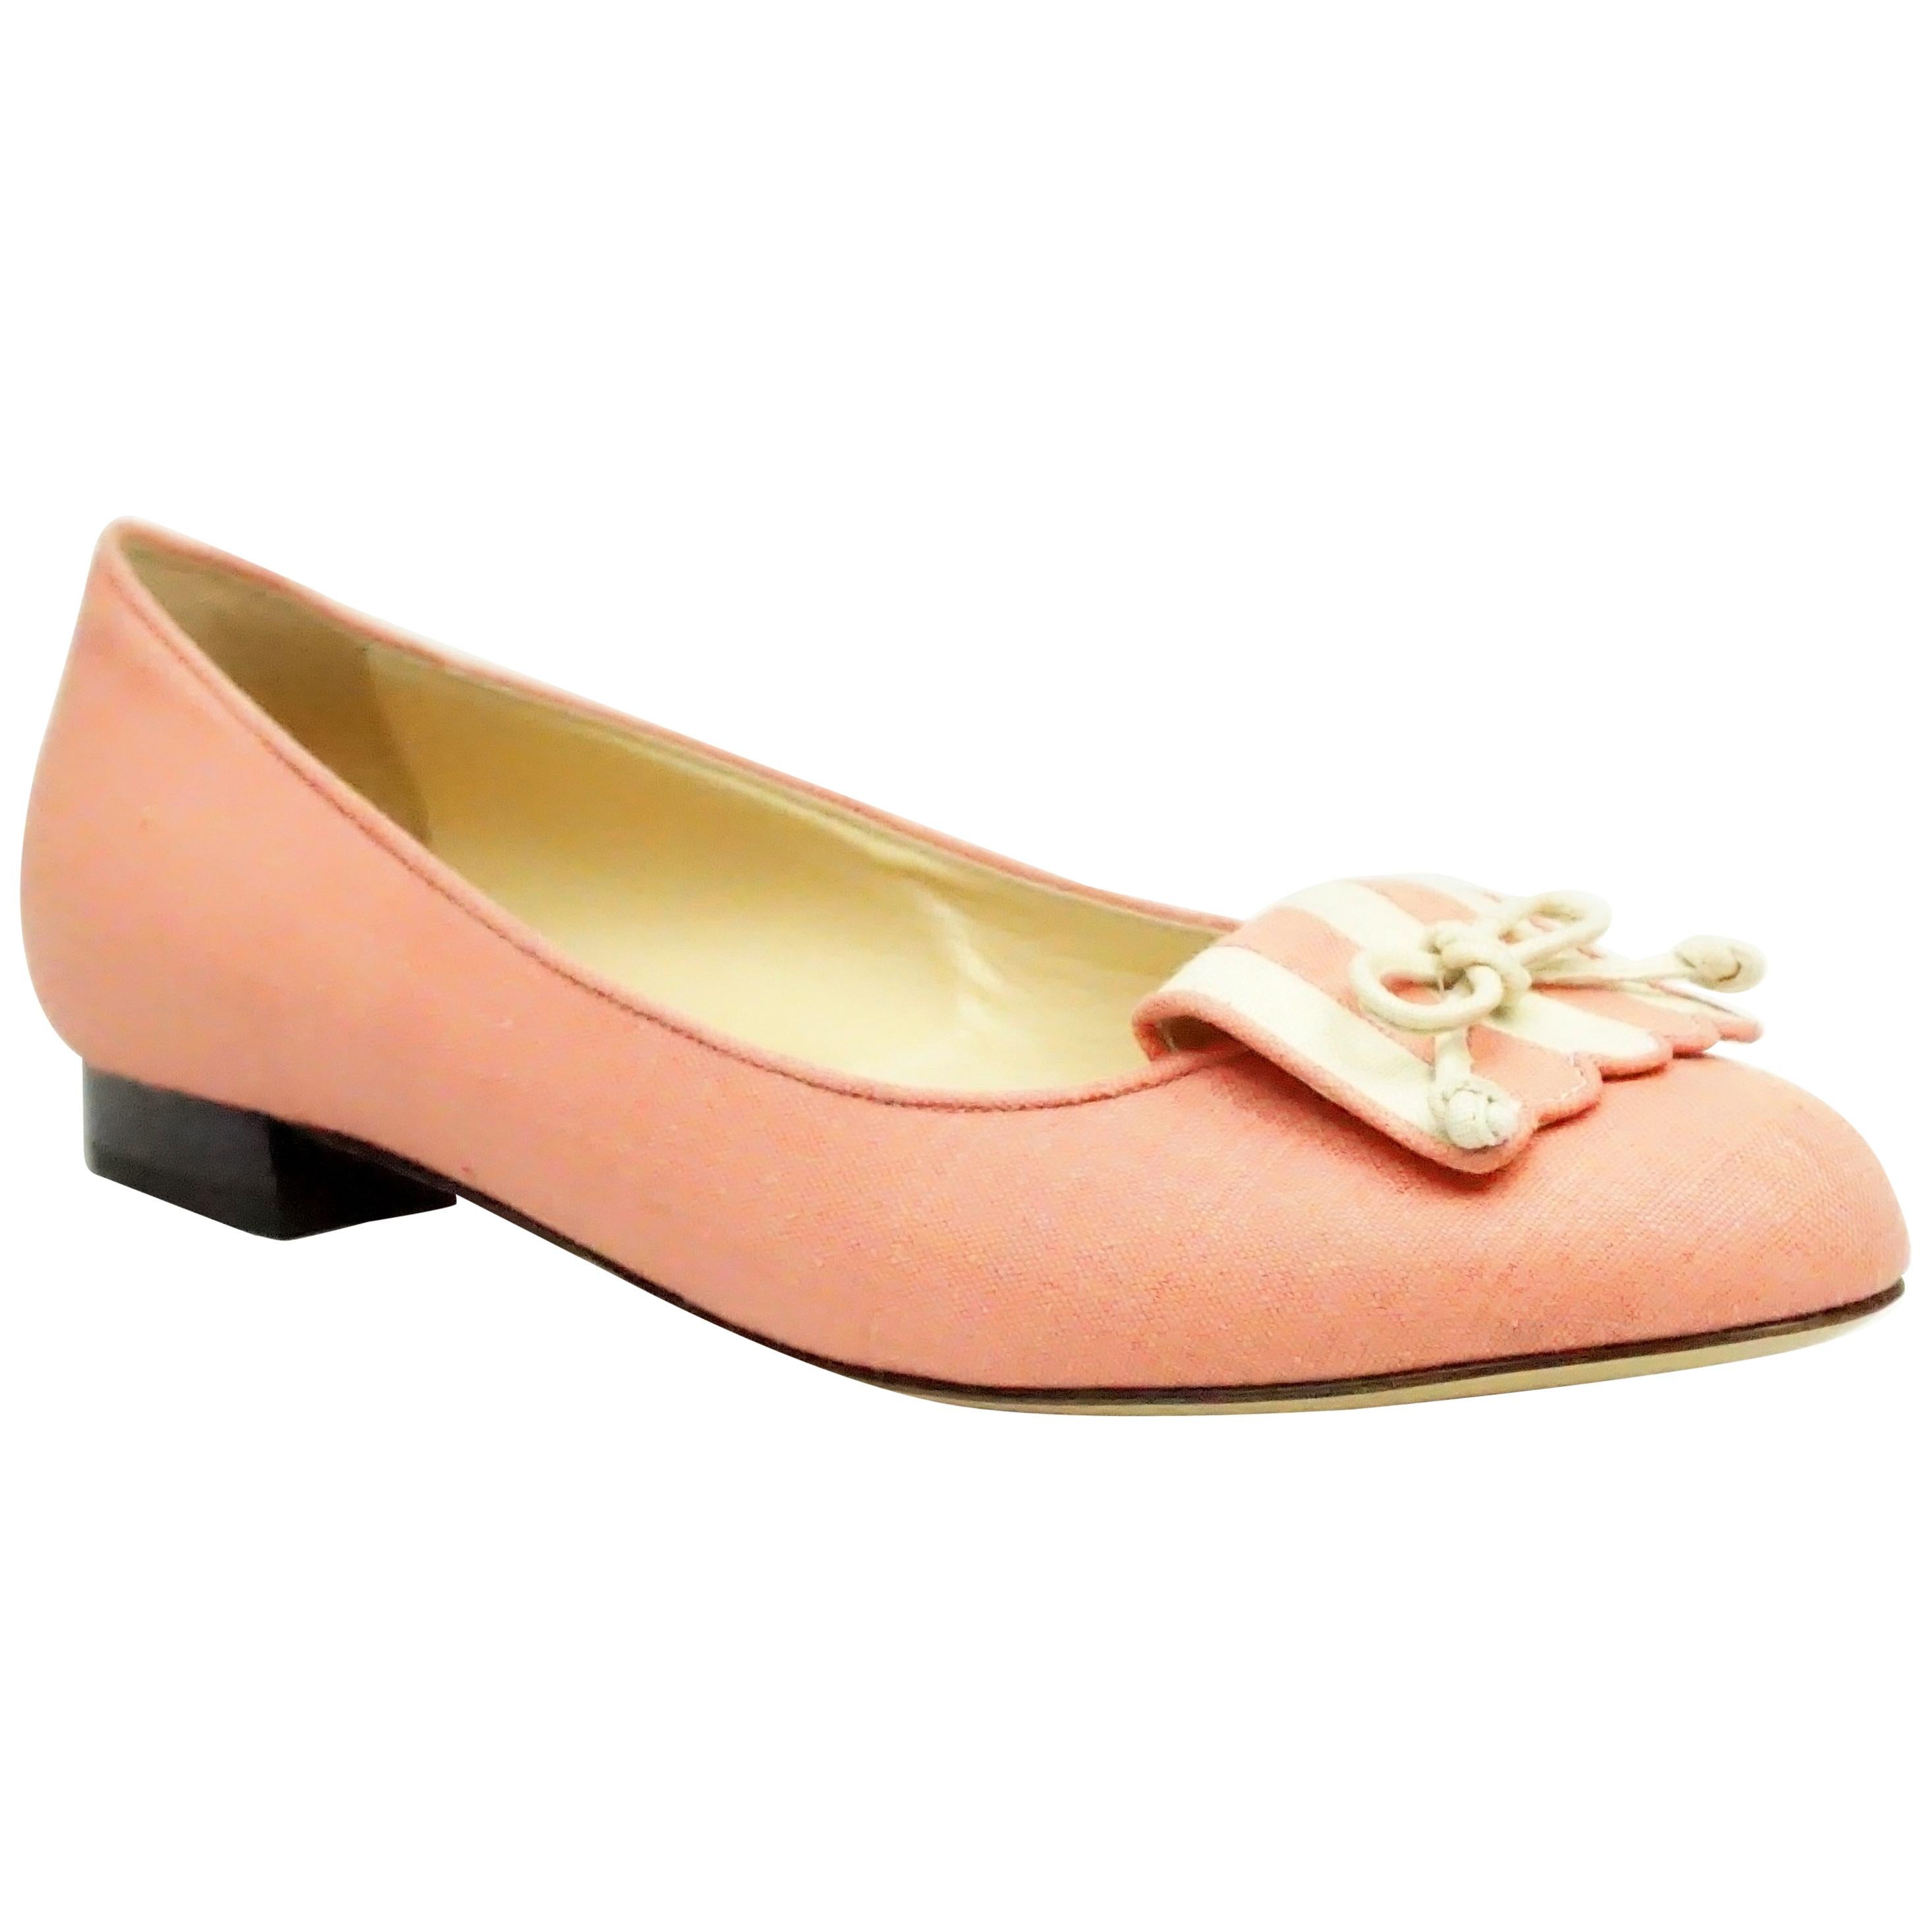 Charlotte Olympia Coral Linen Flats - 37